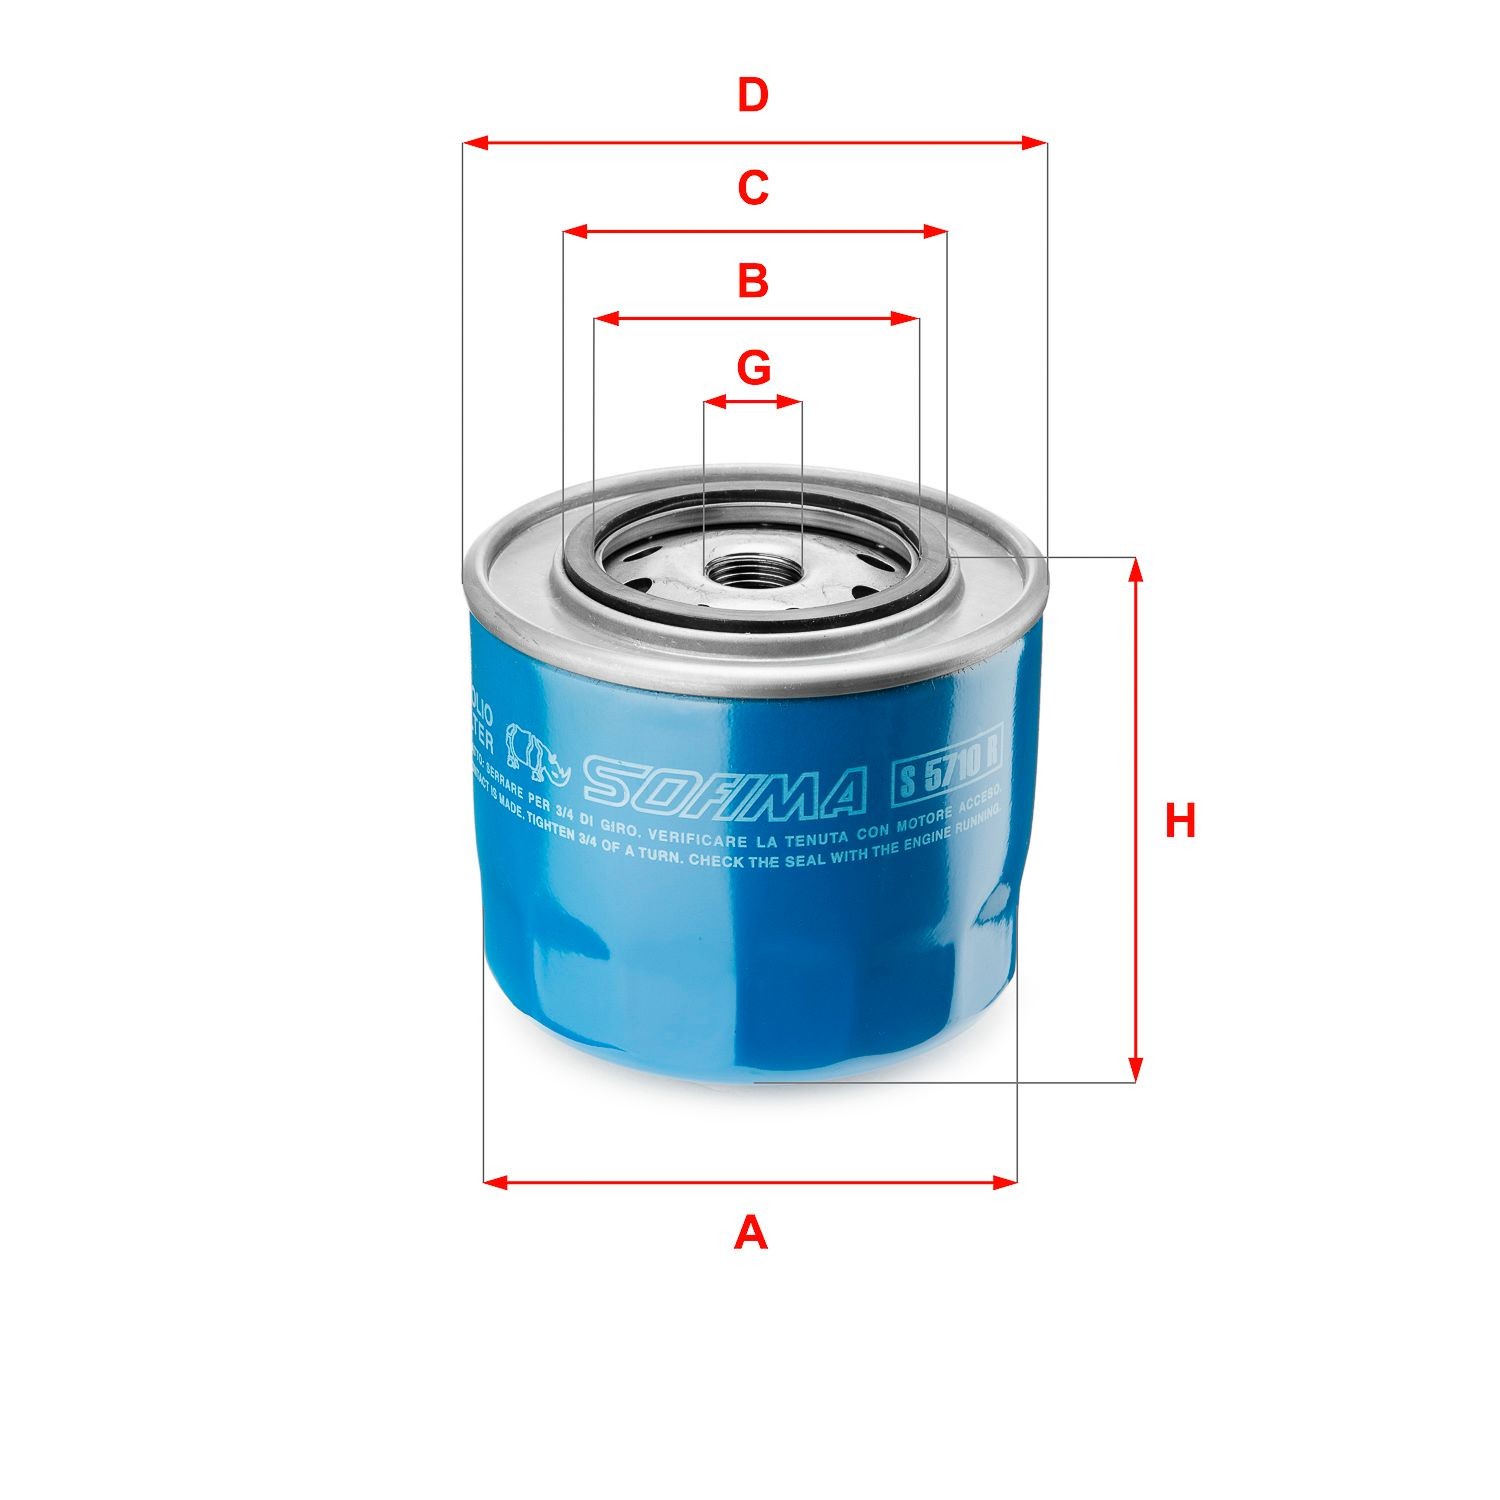 SOFIMA S 5710 R Oil filter 3/4-16 UNF, with one anti-return valve, Spin-on Filter